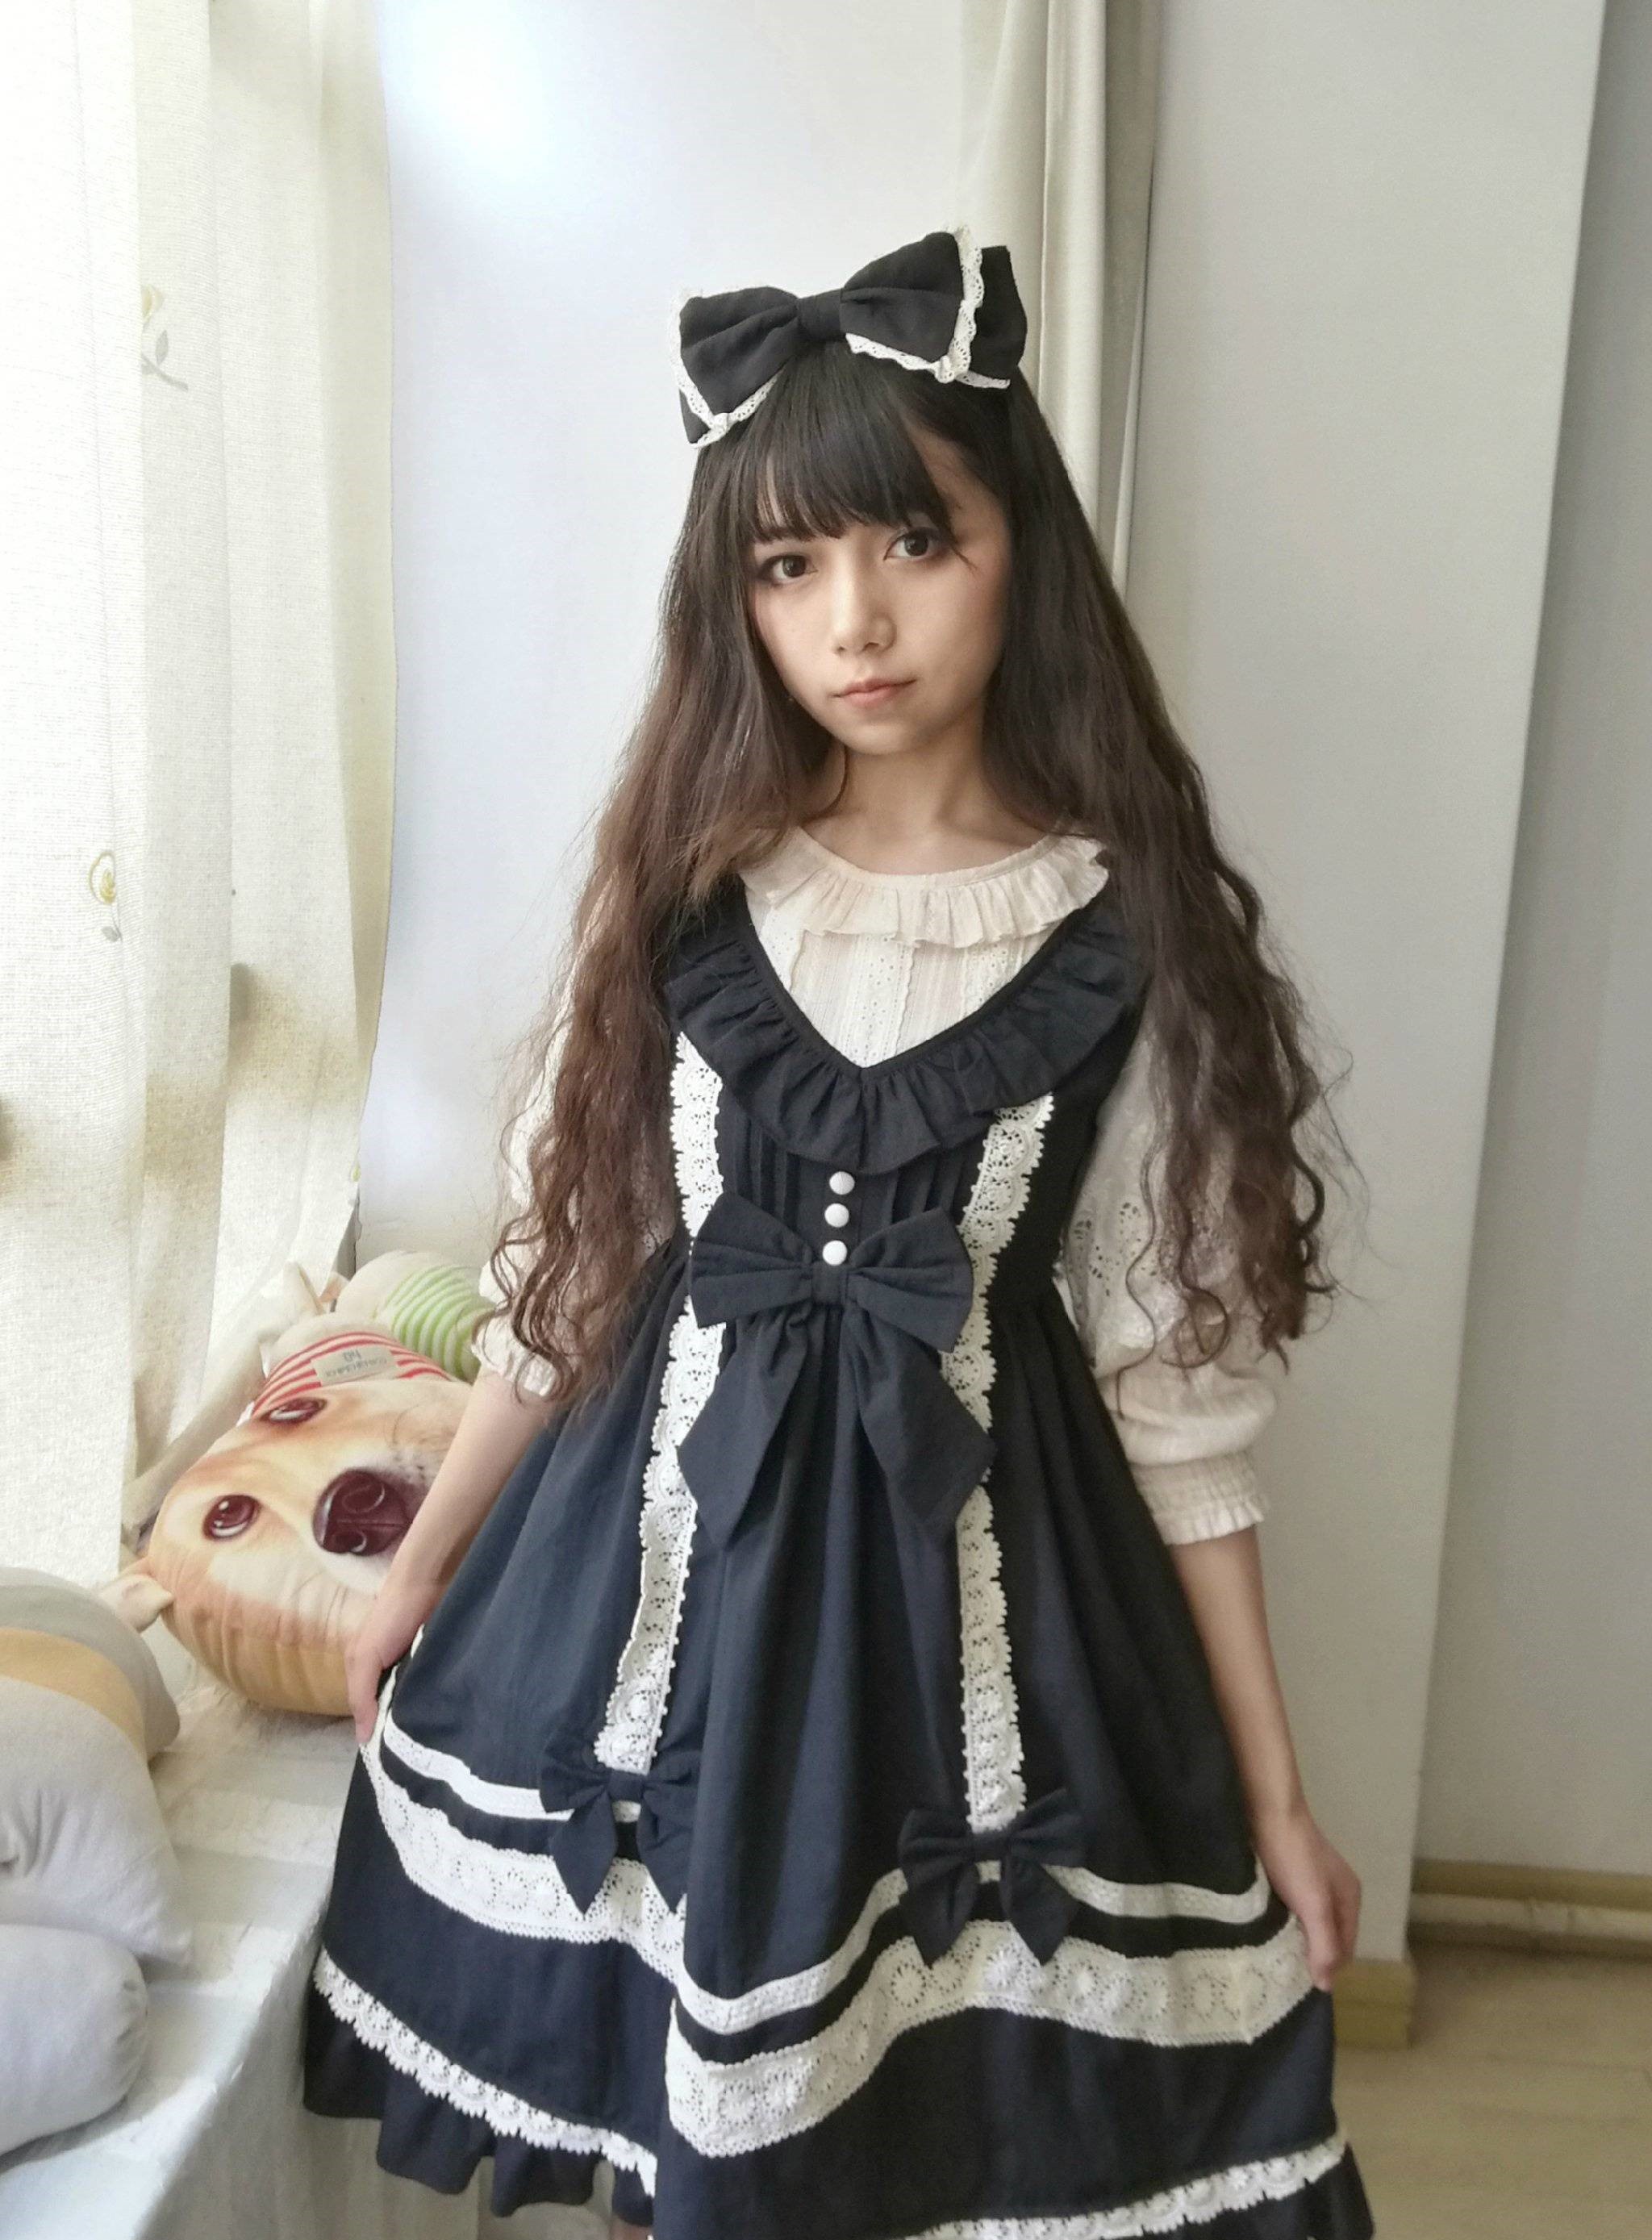 Is Lolita style dress a subculture which cannot be accepted